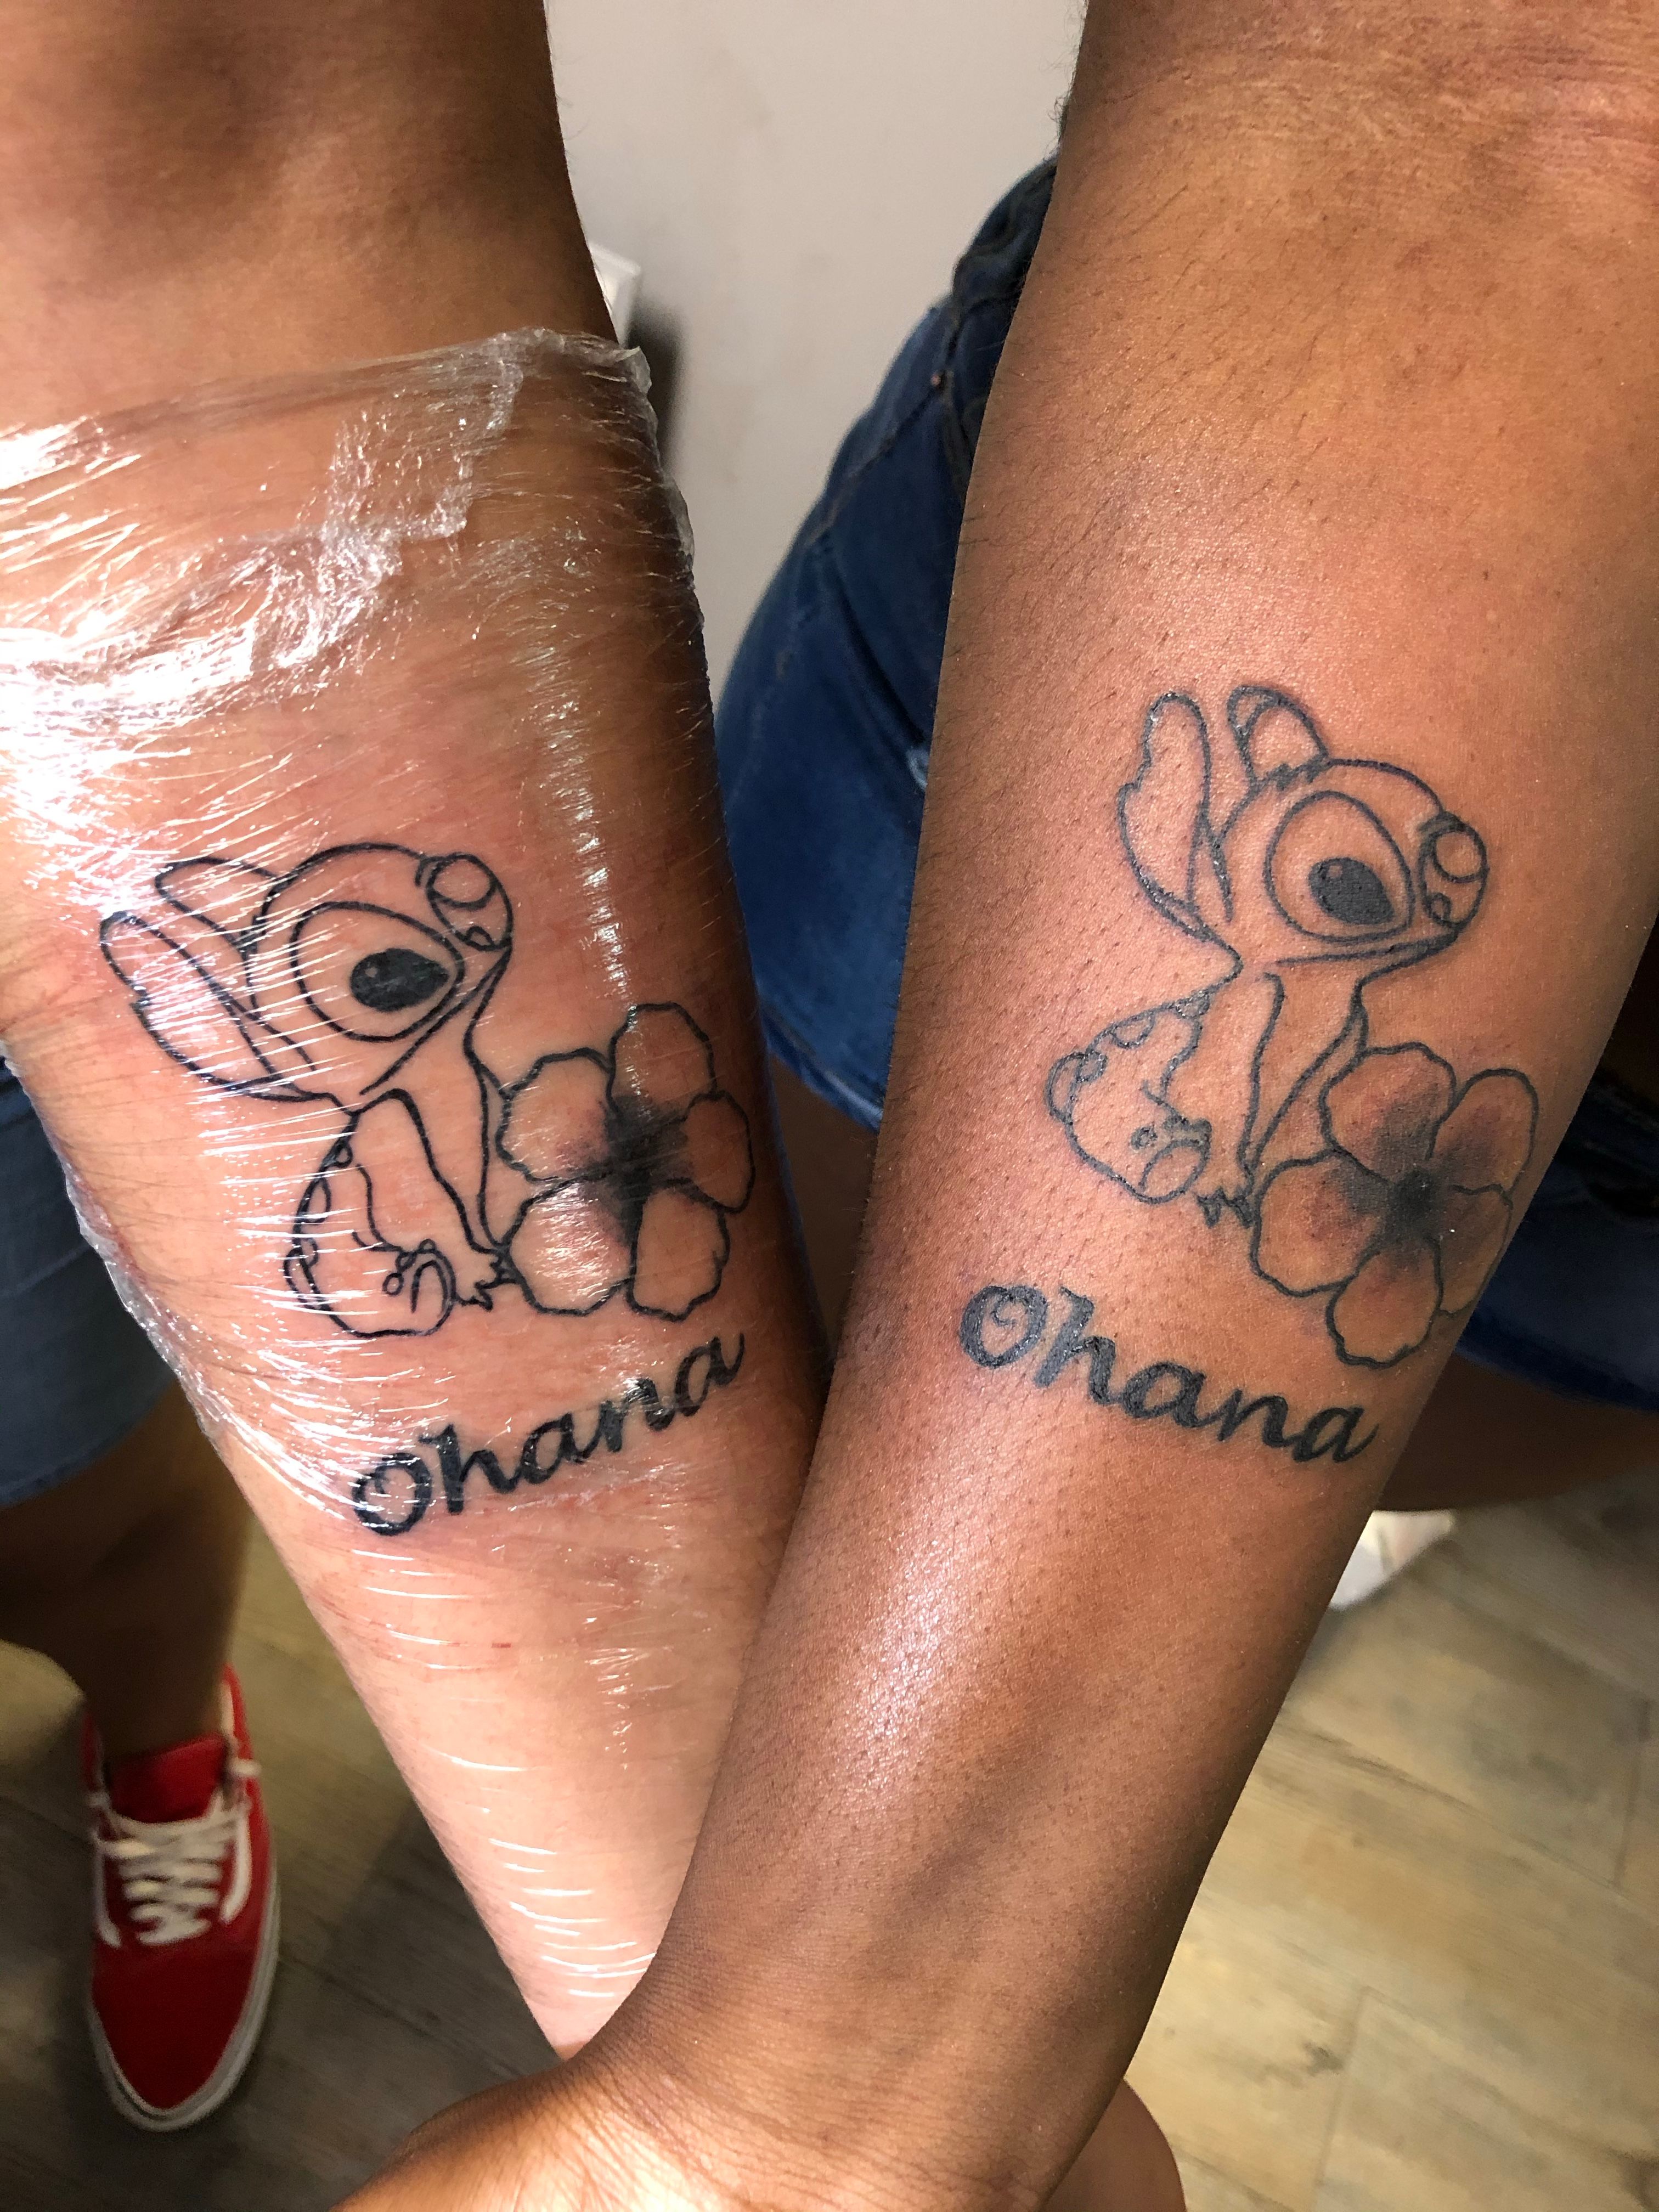 Disney Tattoos | Page 82 | The DIS Disney Discussion Forums - DISboards.com